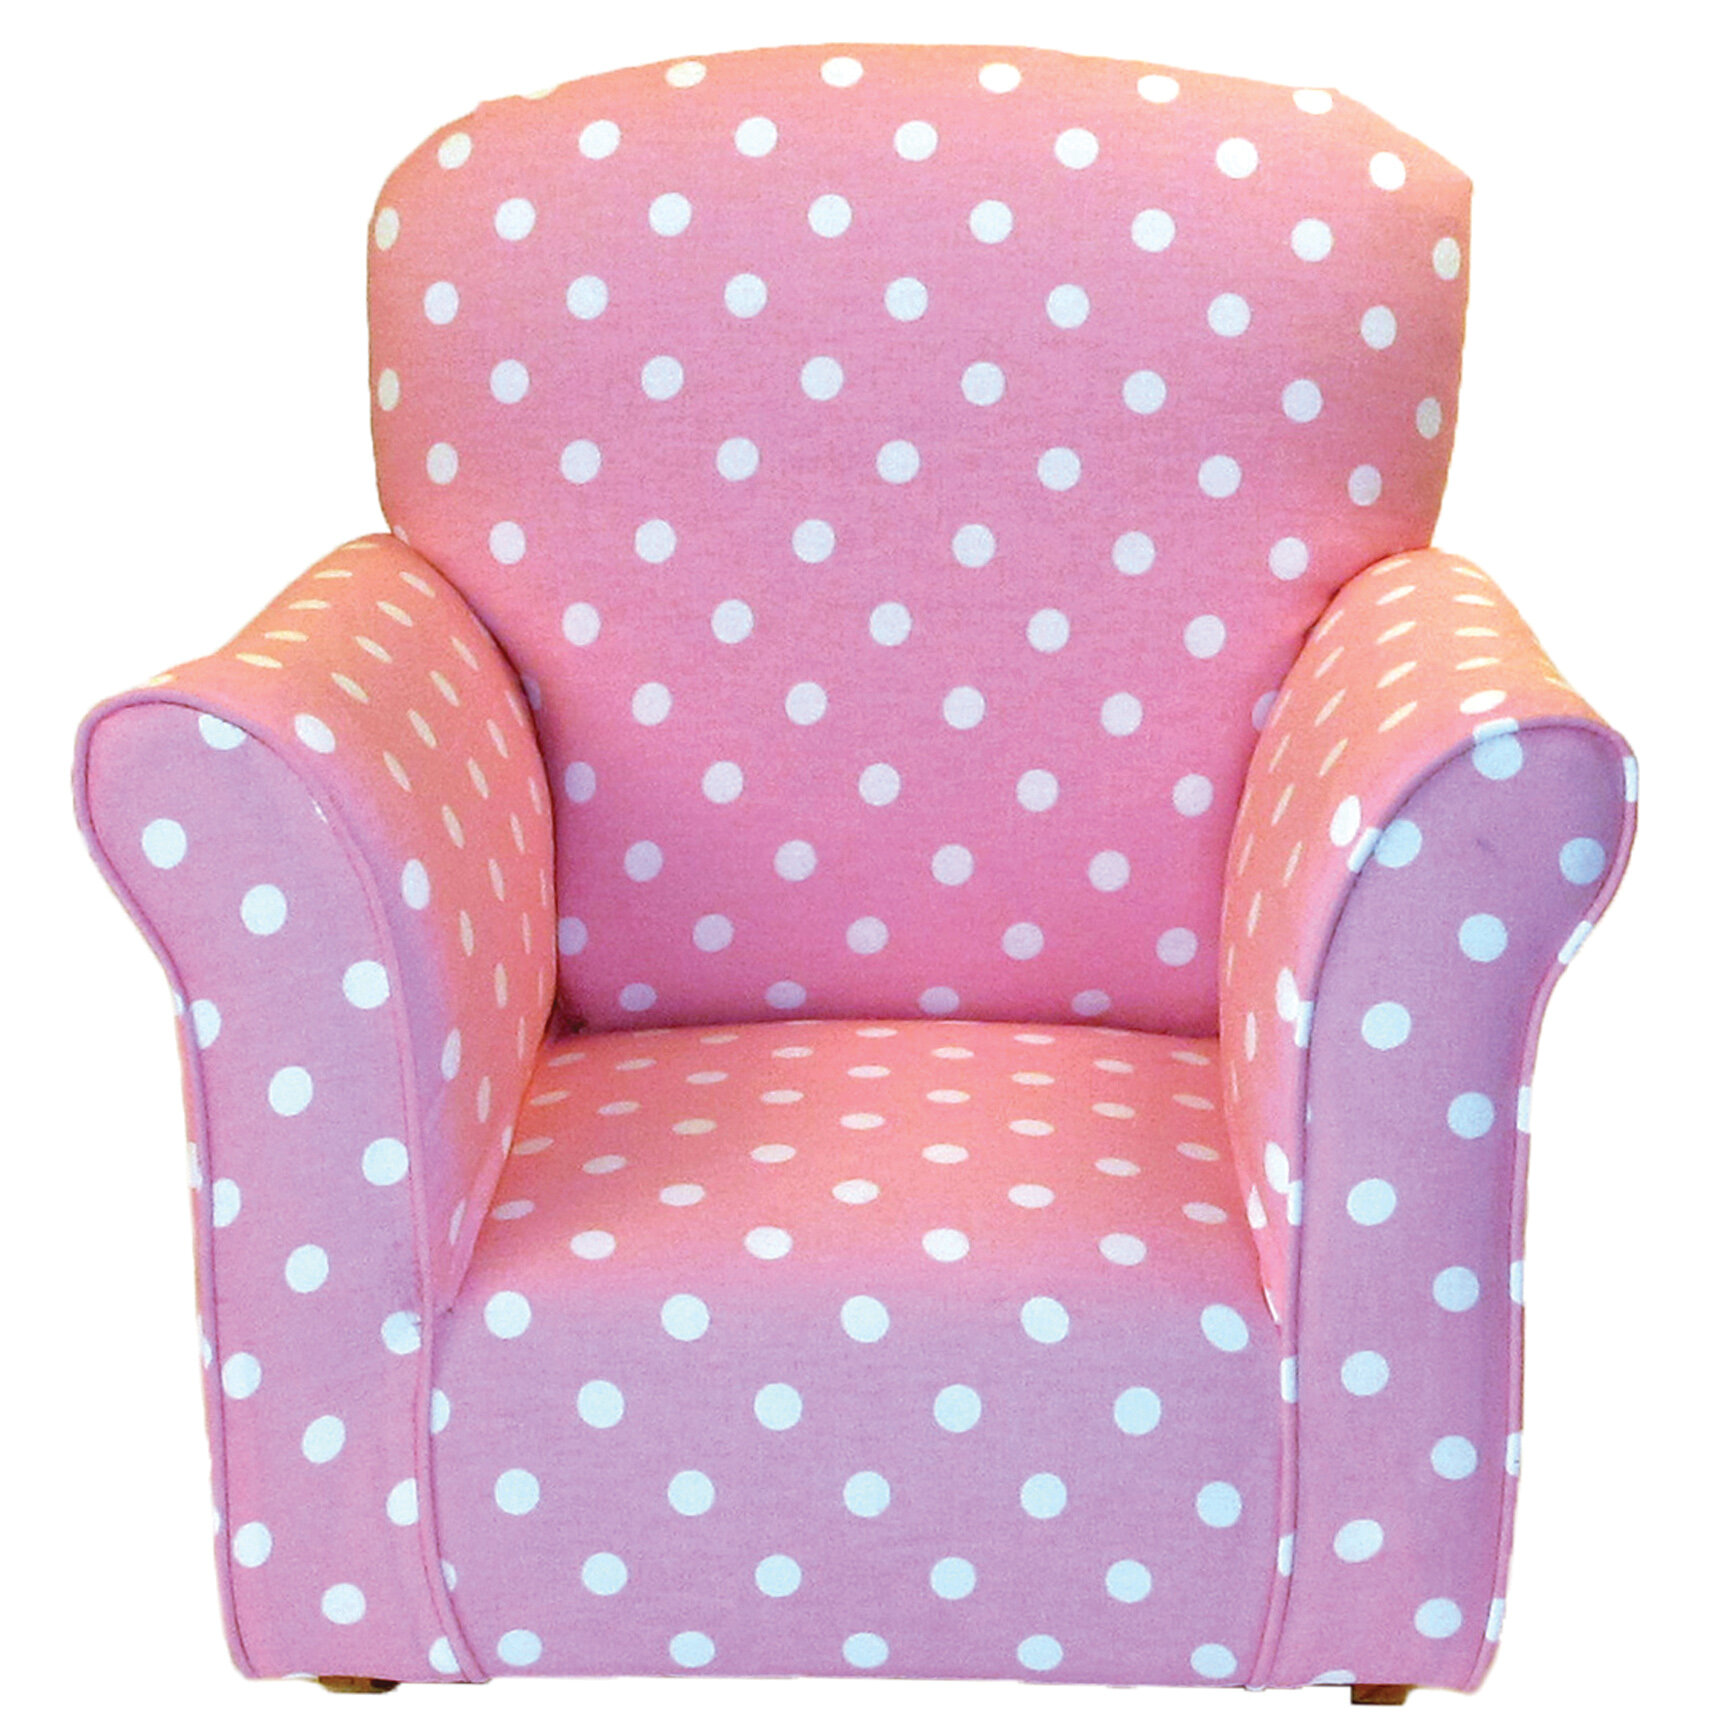 childs upholstered rocking chair